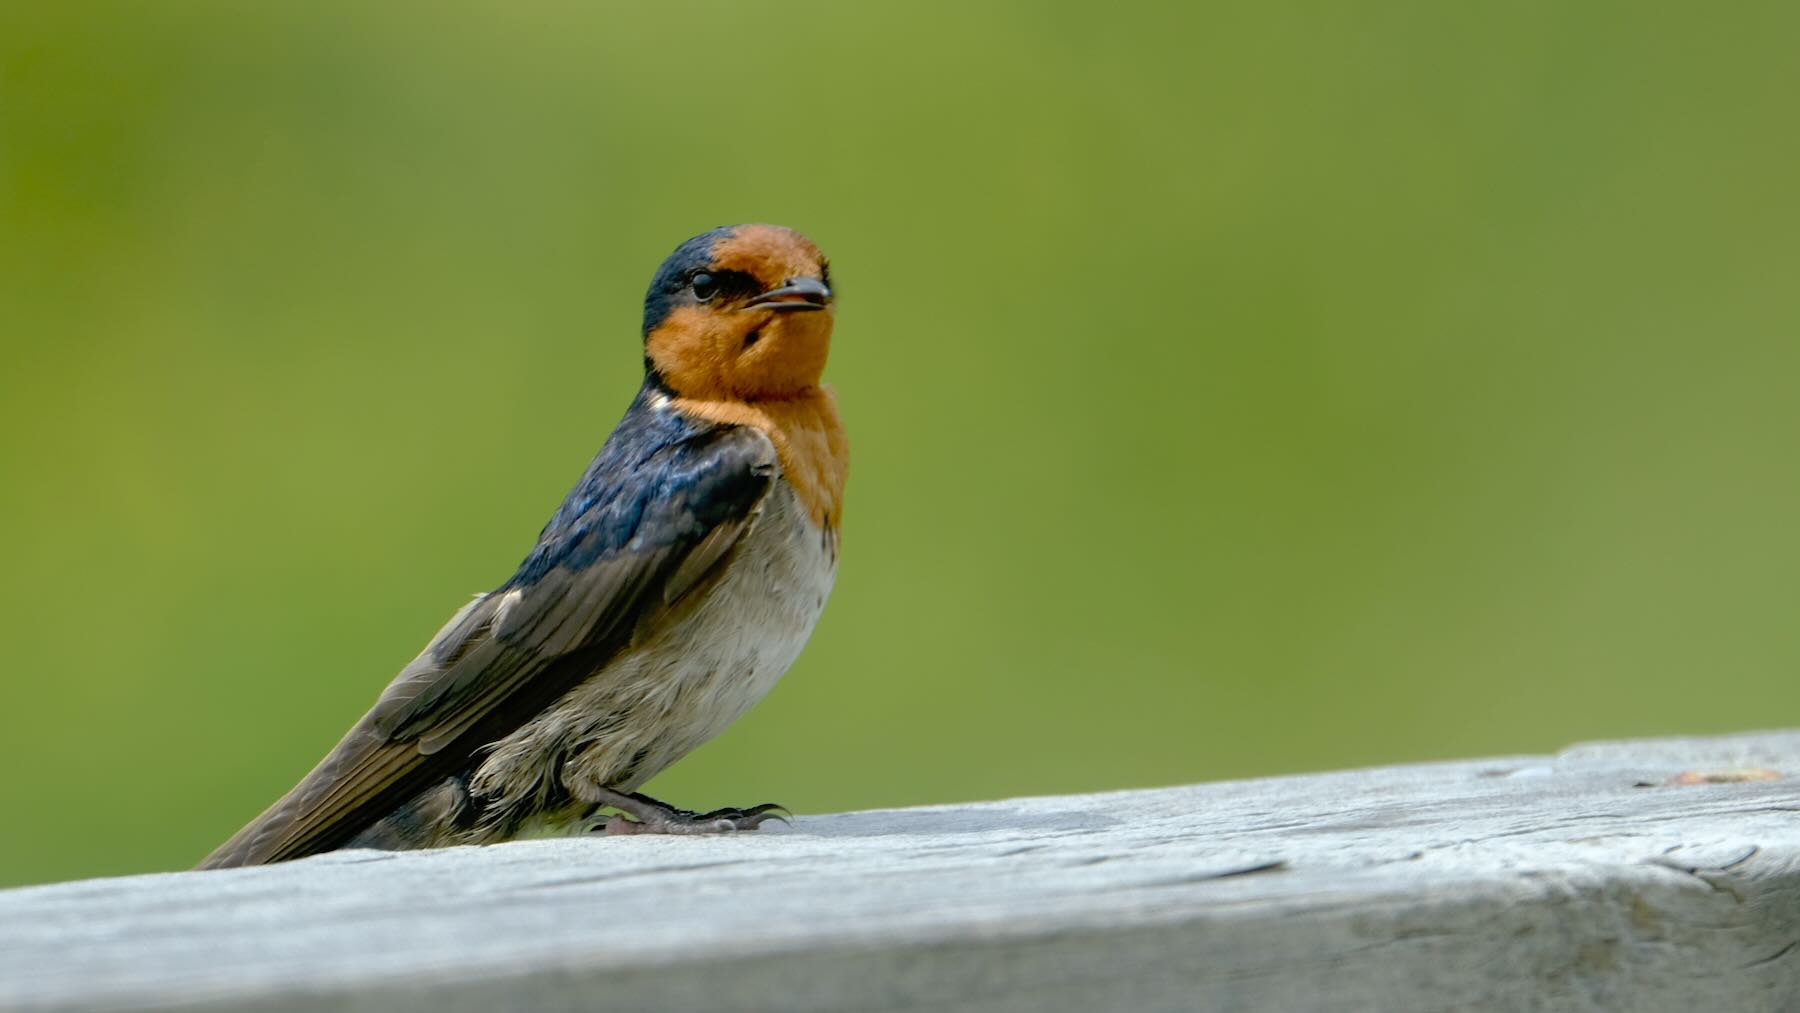 Swallow turned slightly right and with beak slightly open. 